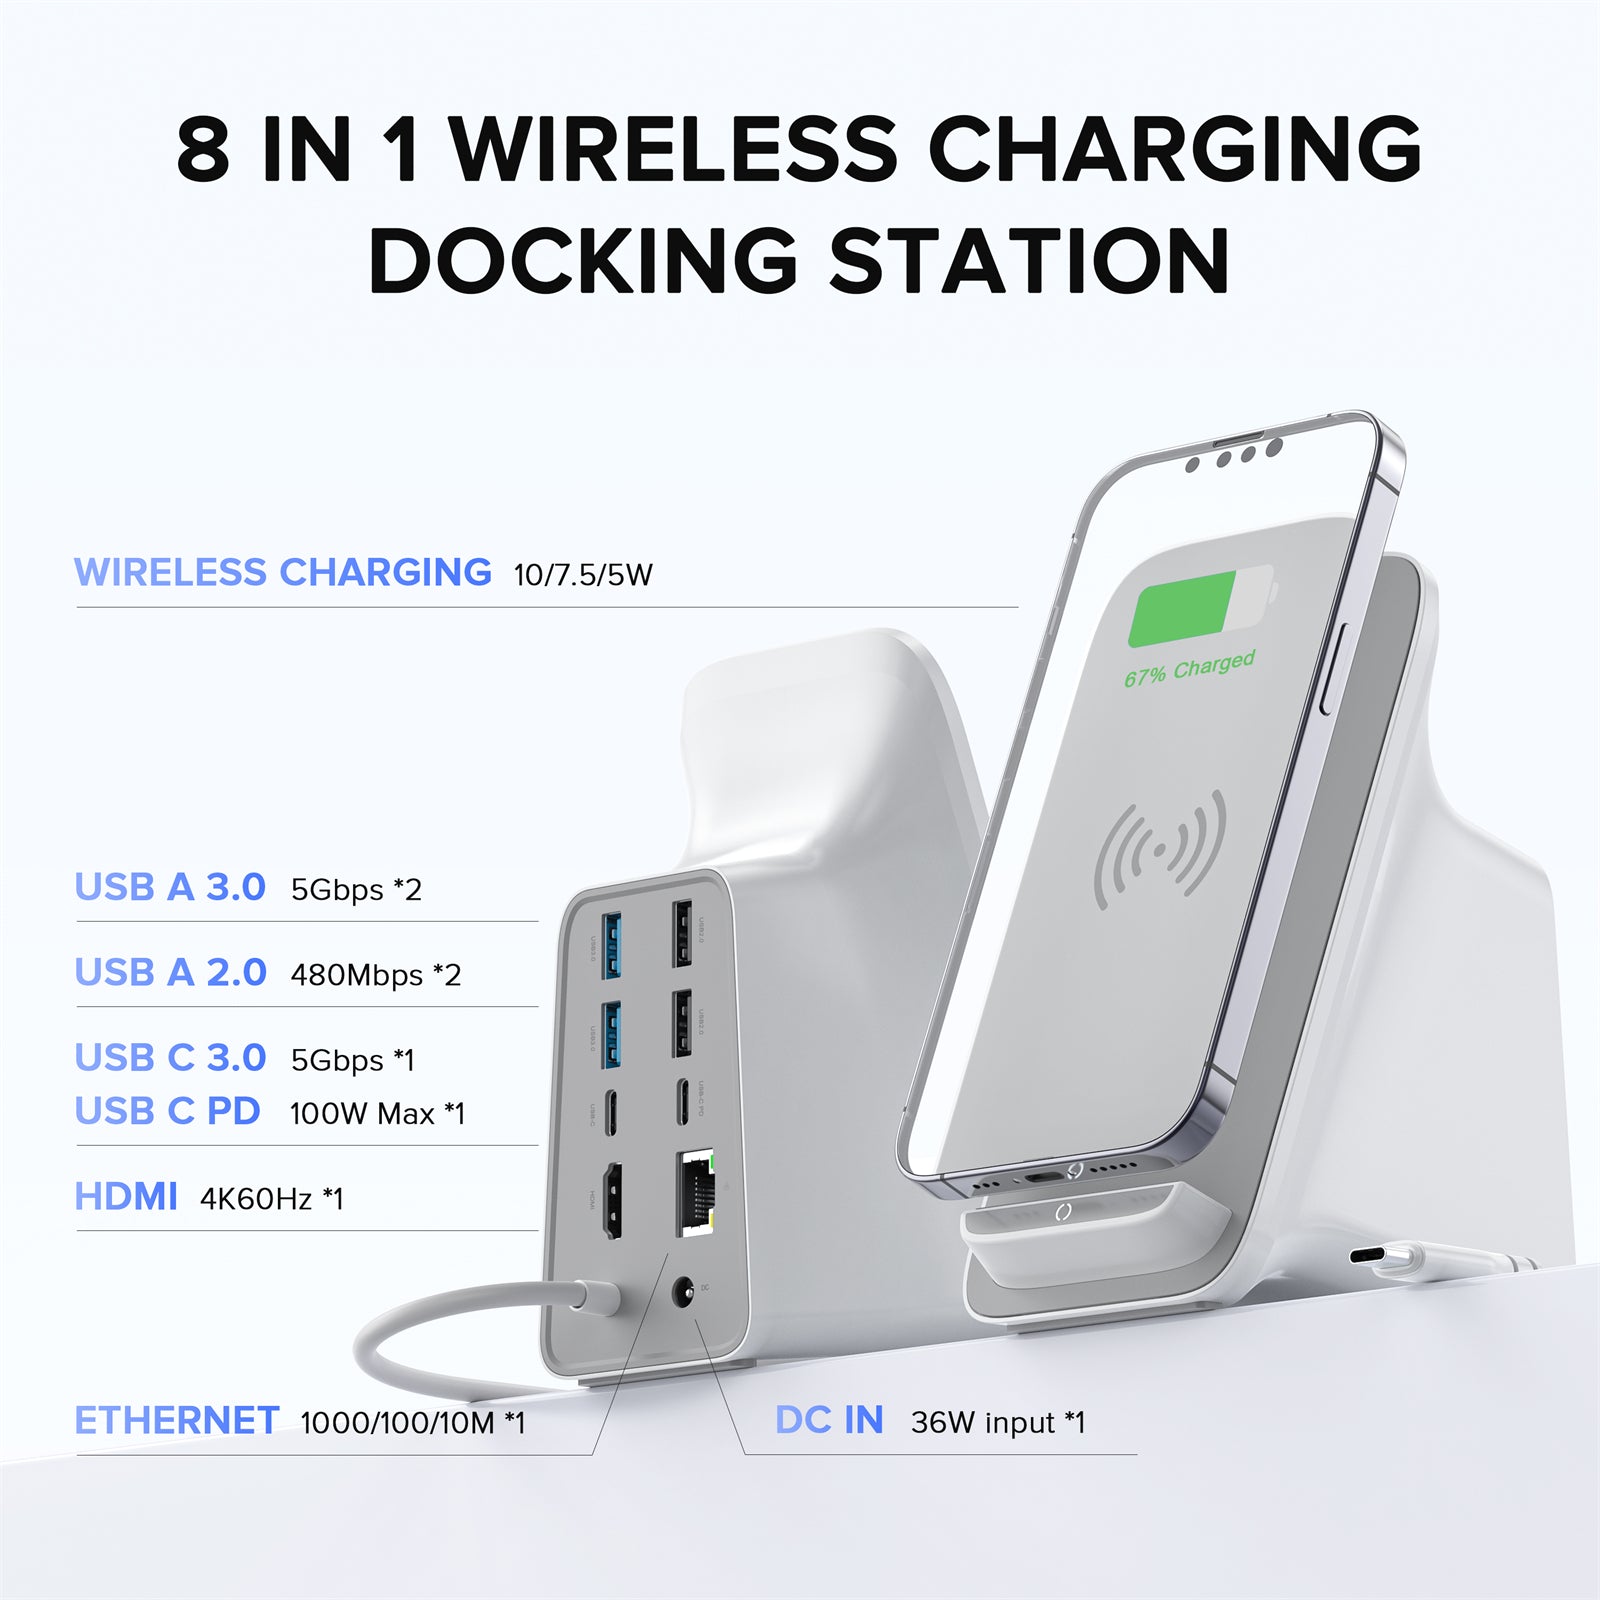 PULWTOP 9-in-1 laptop docking station, up to 10W wireless charging pad, suitable for iPhone 13/12 series, Samsung S22, Pixel 4/3, etc.